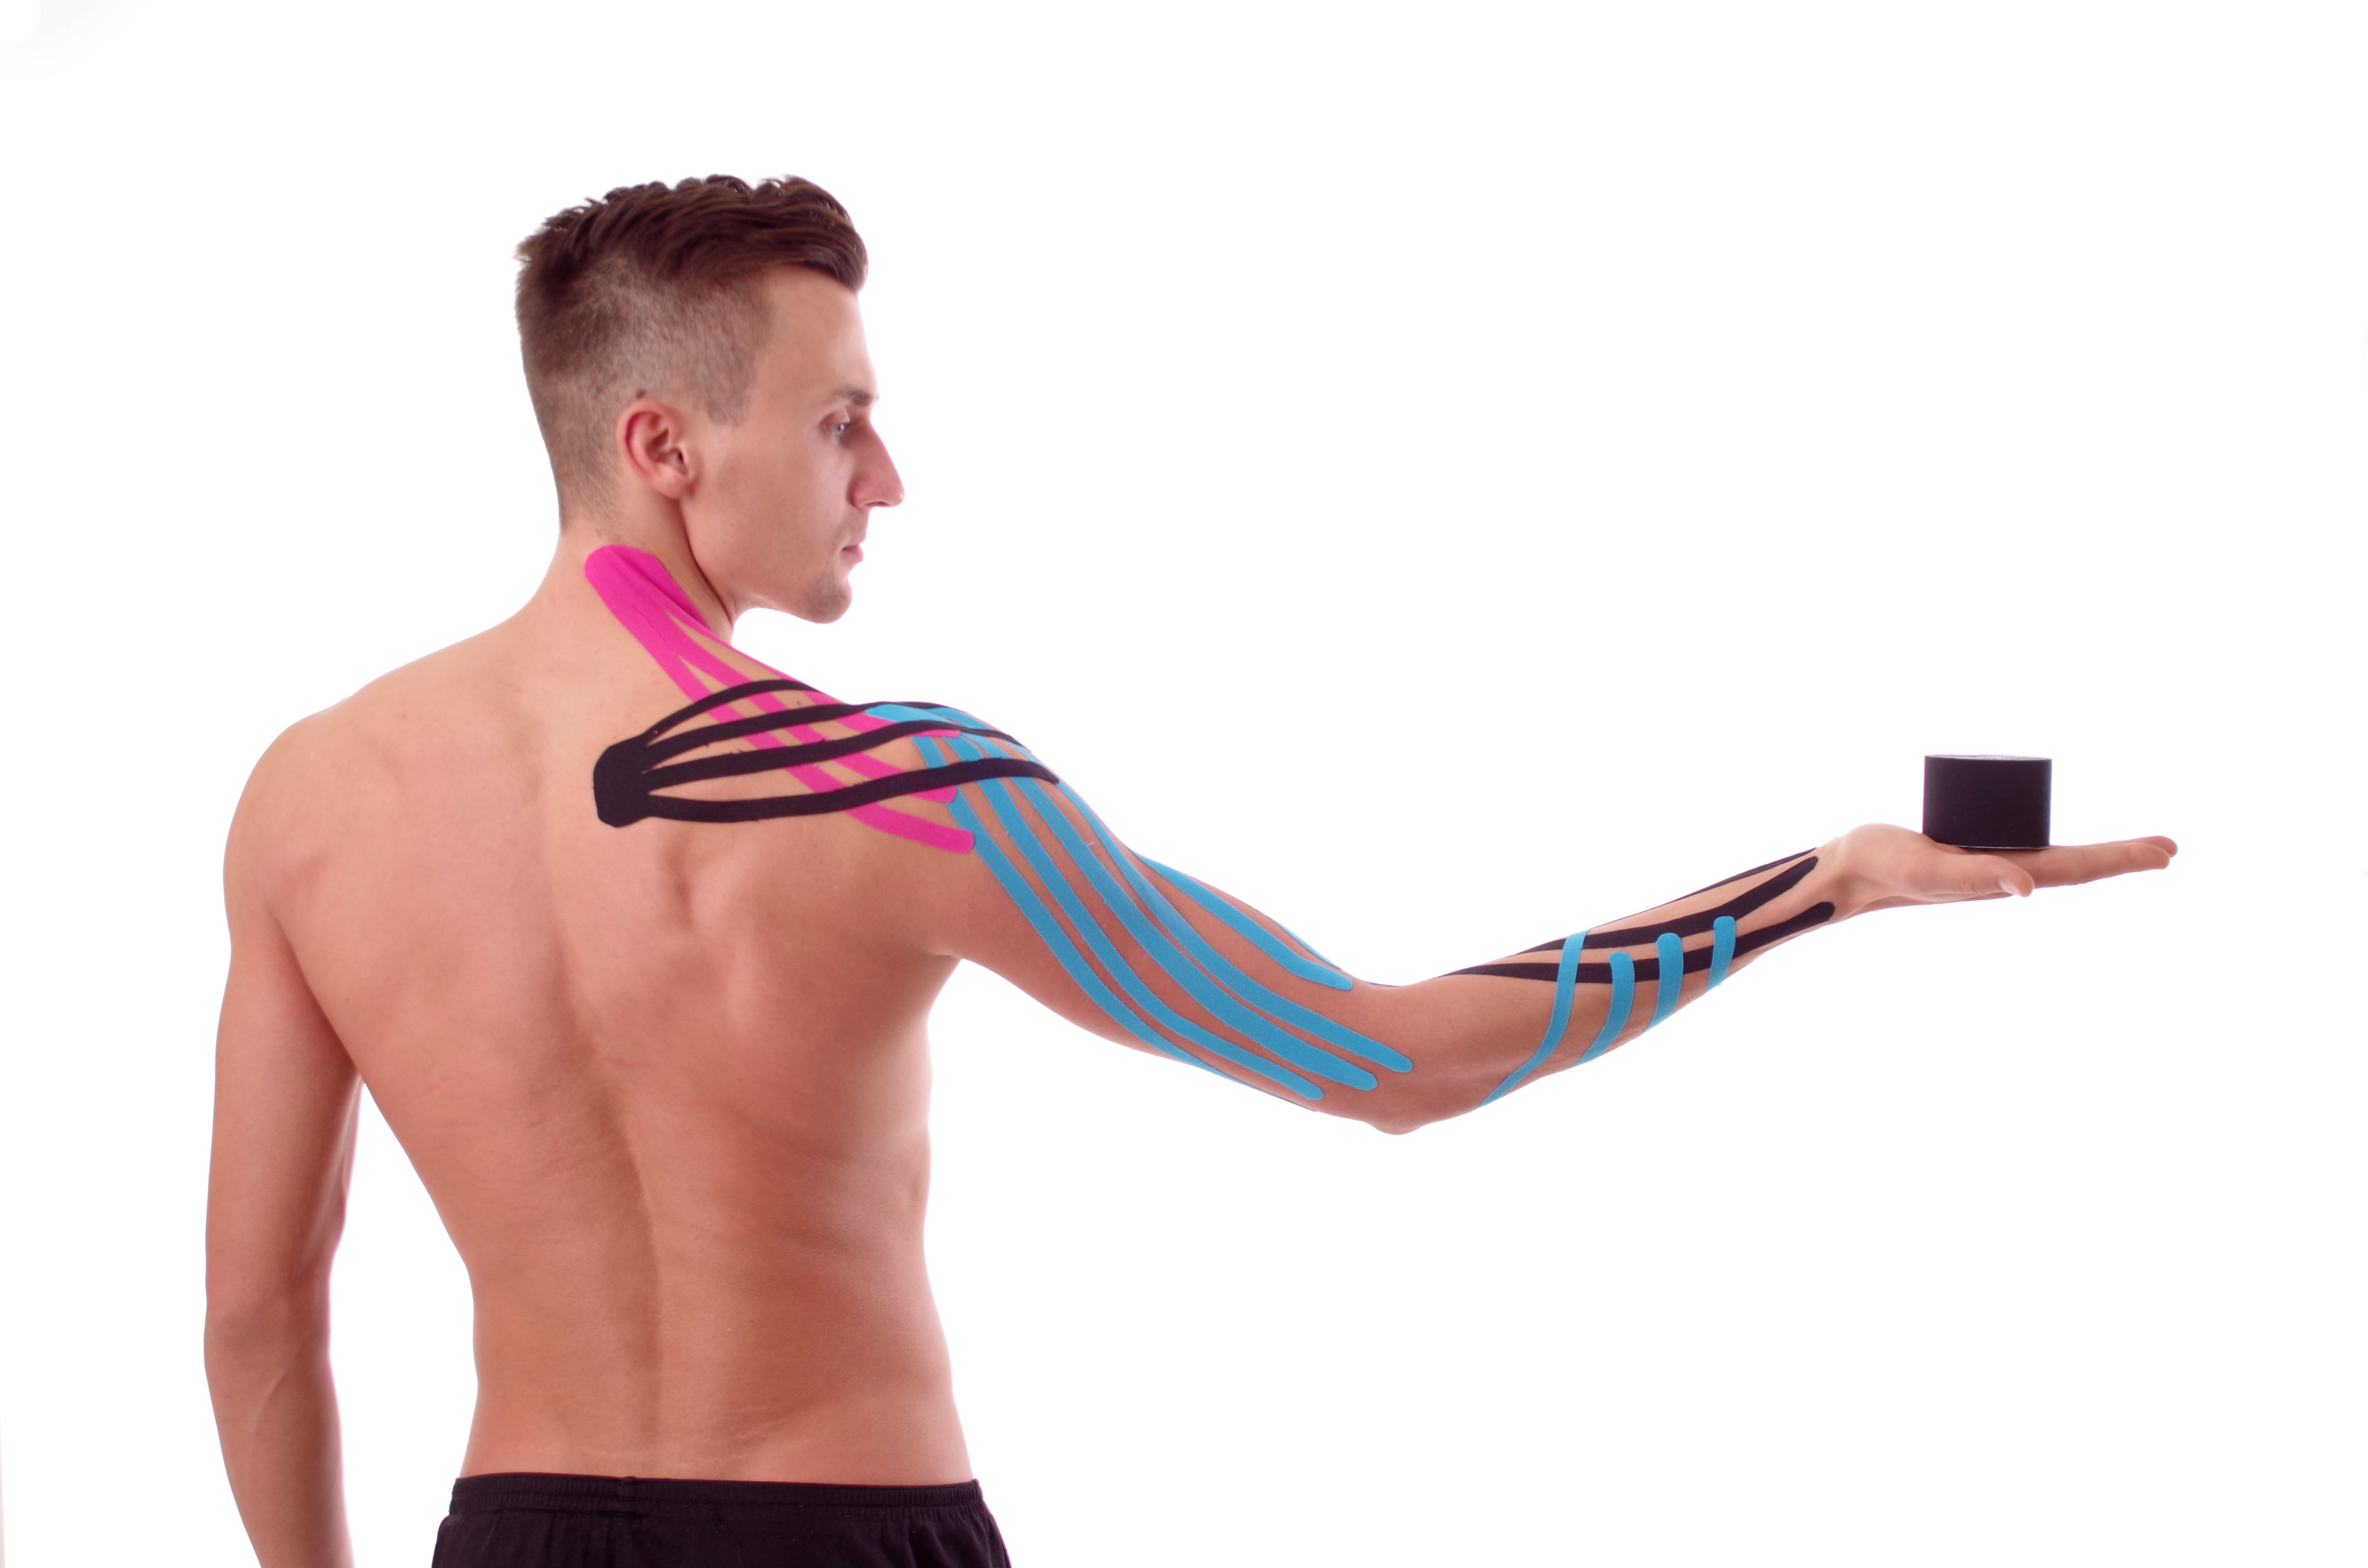 https://hips.hearstapps.com/hmg-prod/images/kinesiology-tape-on-taped-arm-royalty-free-image-1590077098.jpg